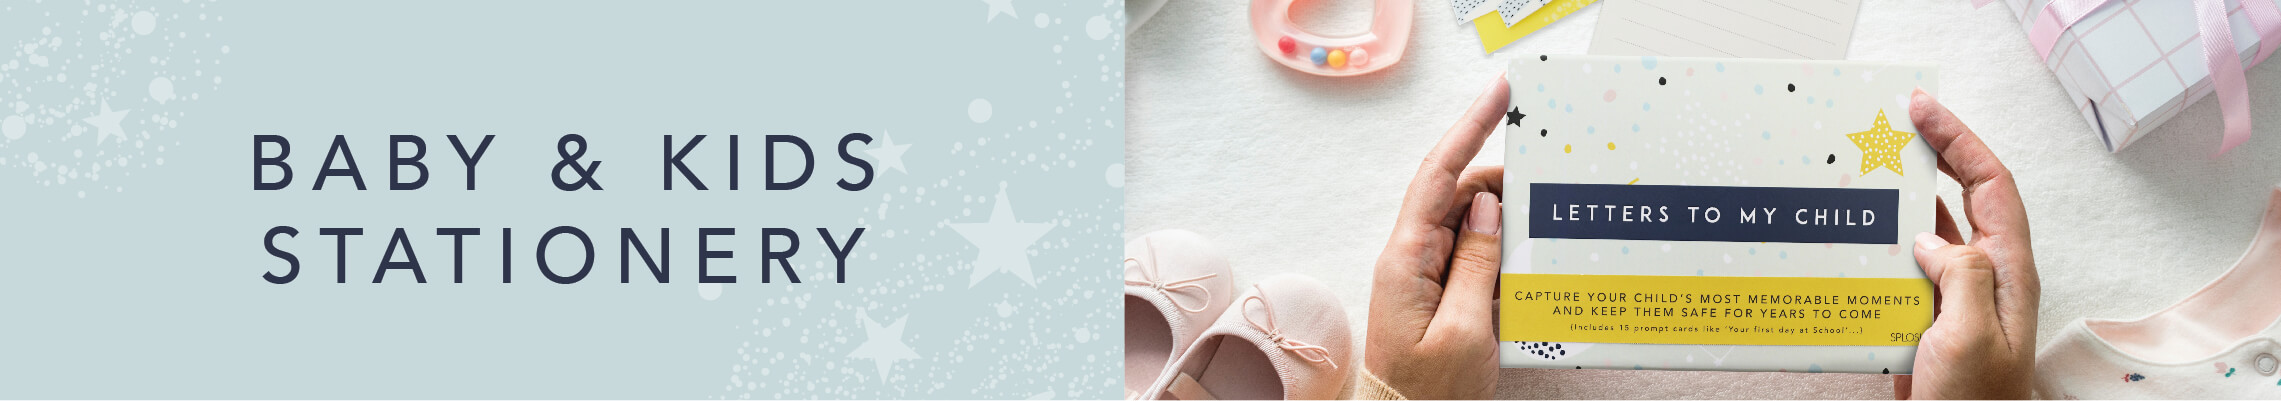 Shop our Baby & Kids Stationery collection!